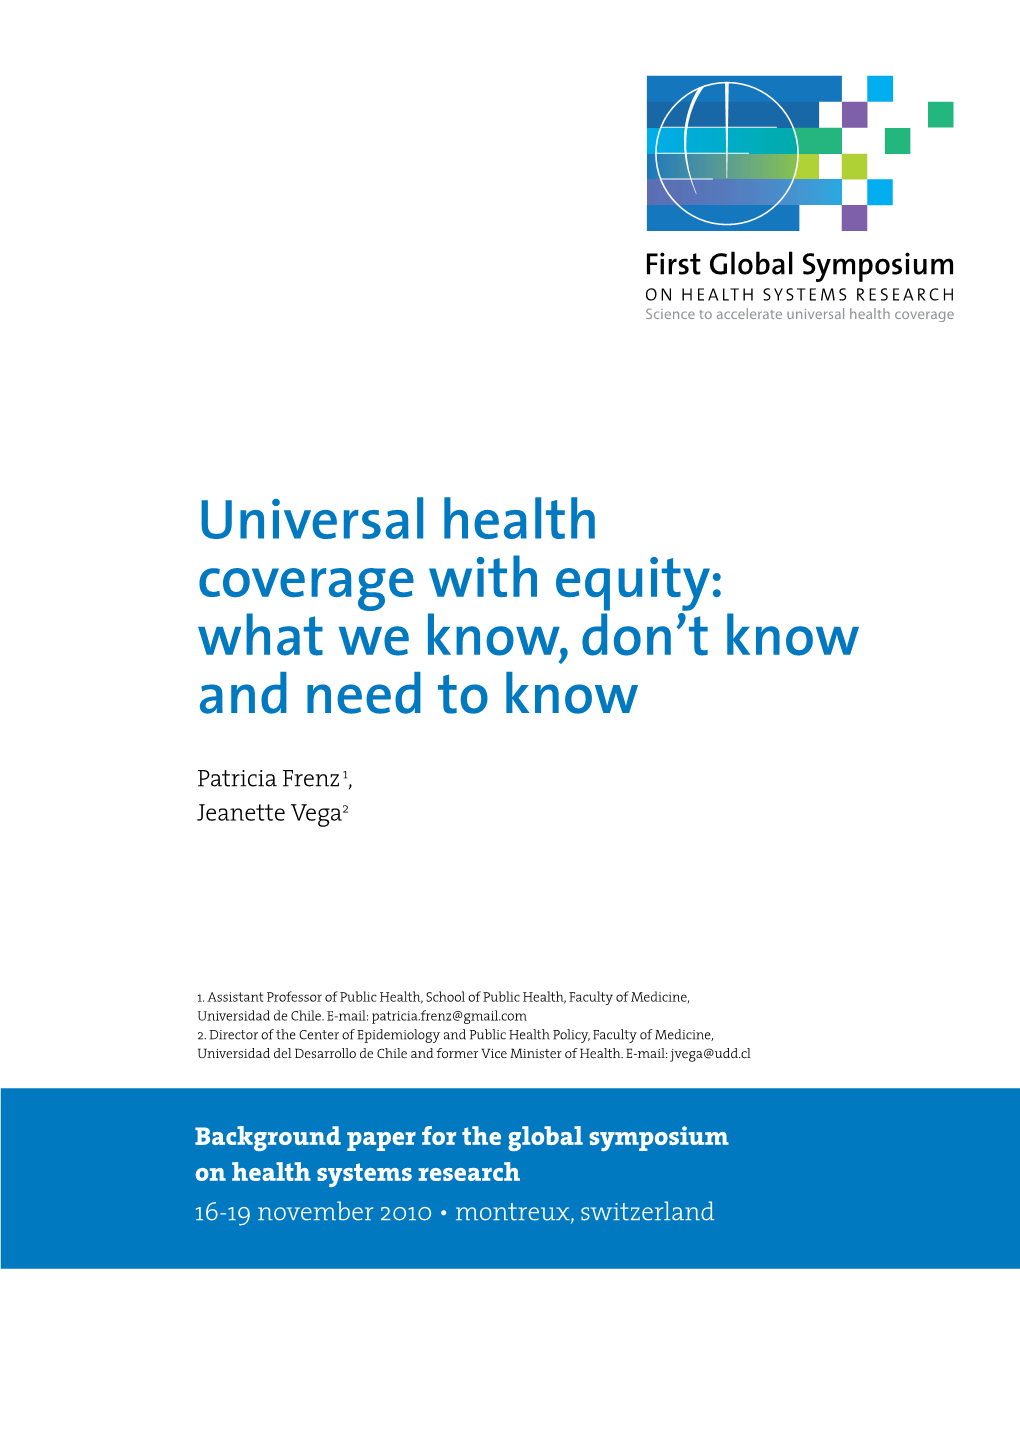 Universal Health Coverage with Equity: What We Know, Don't Know and Need to Know